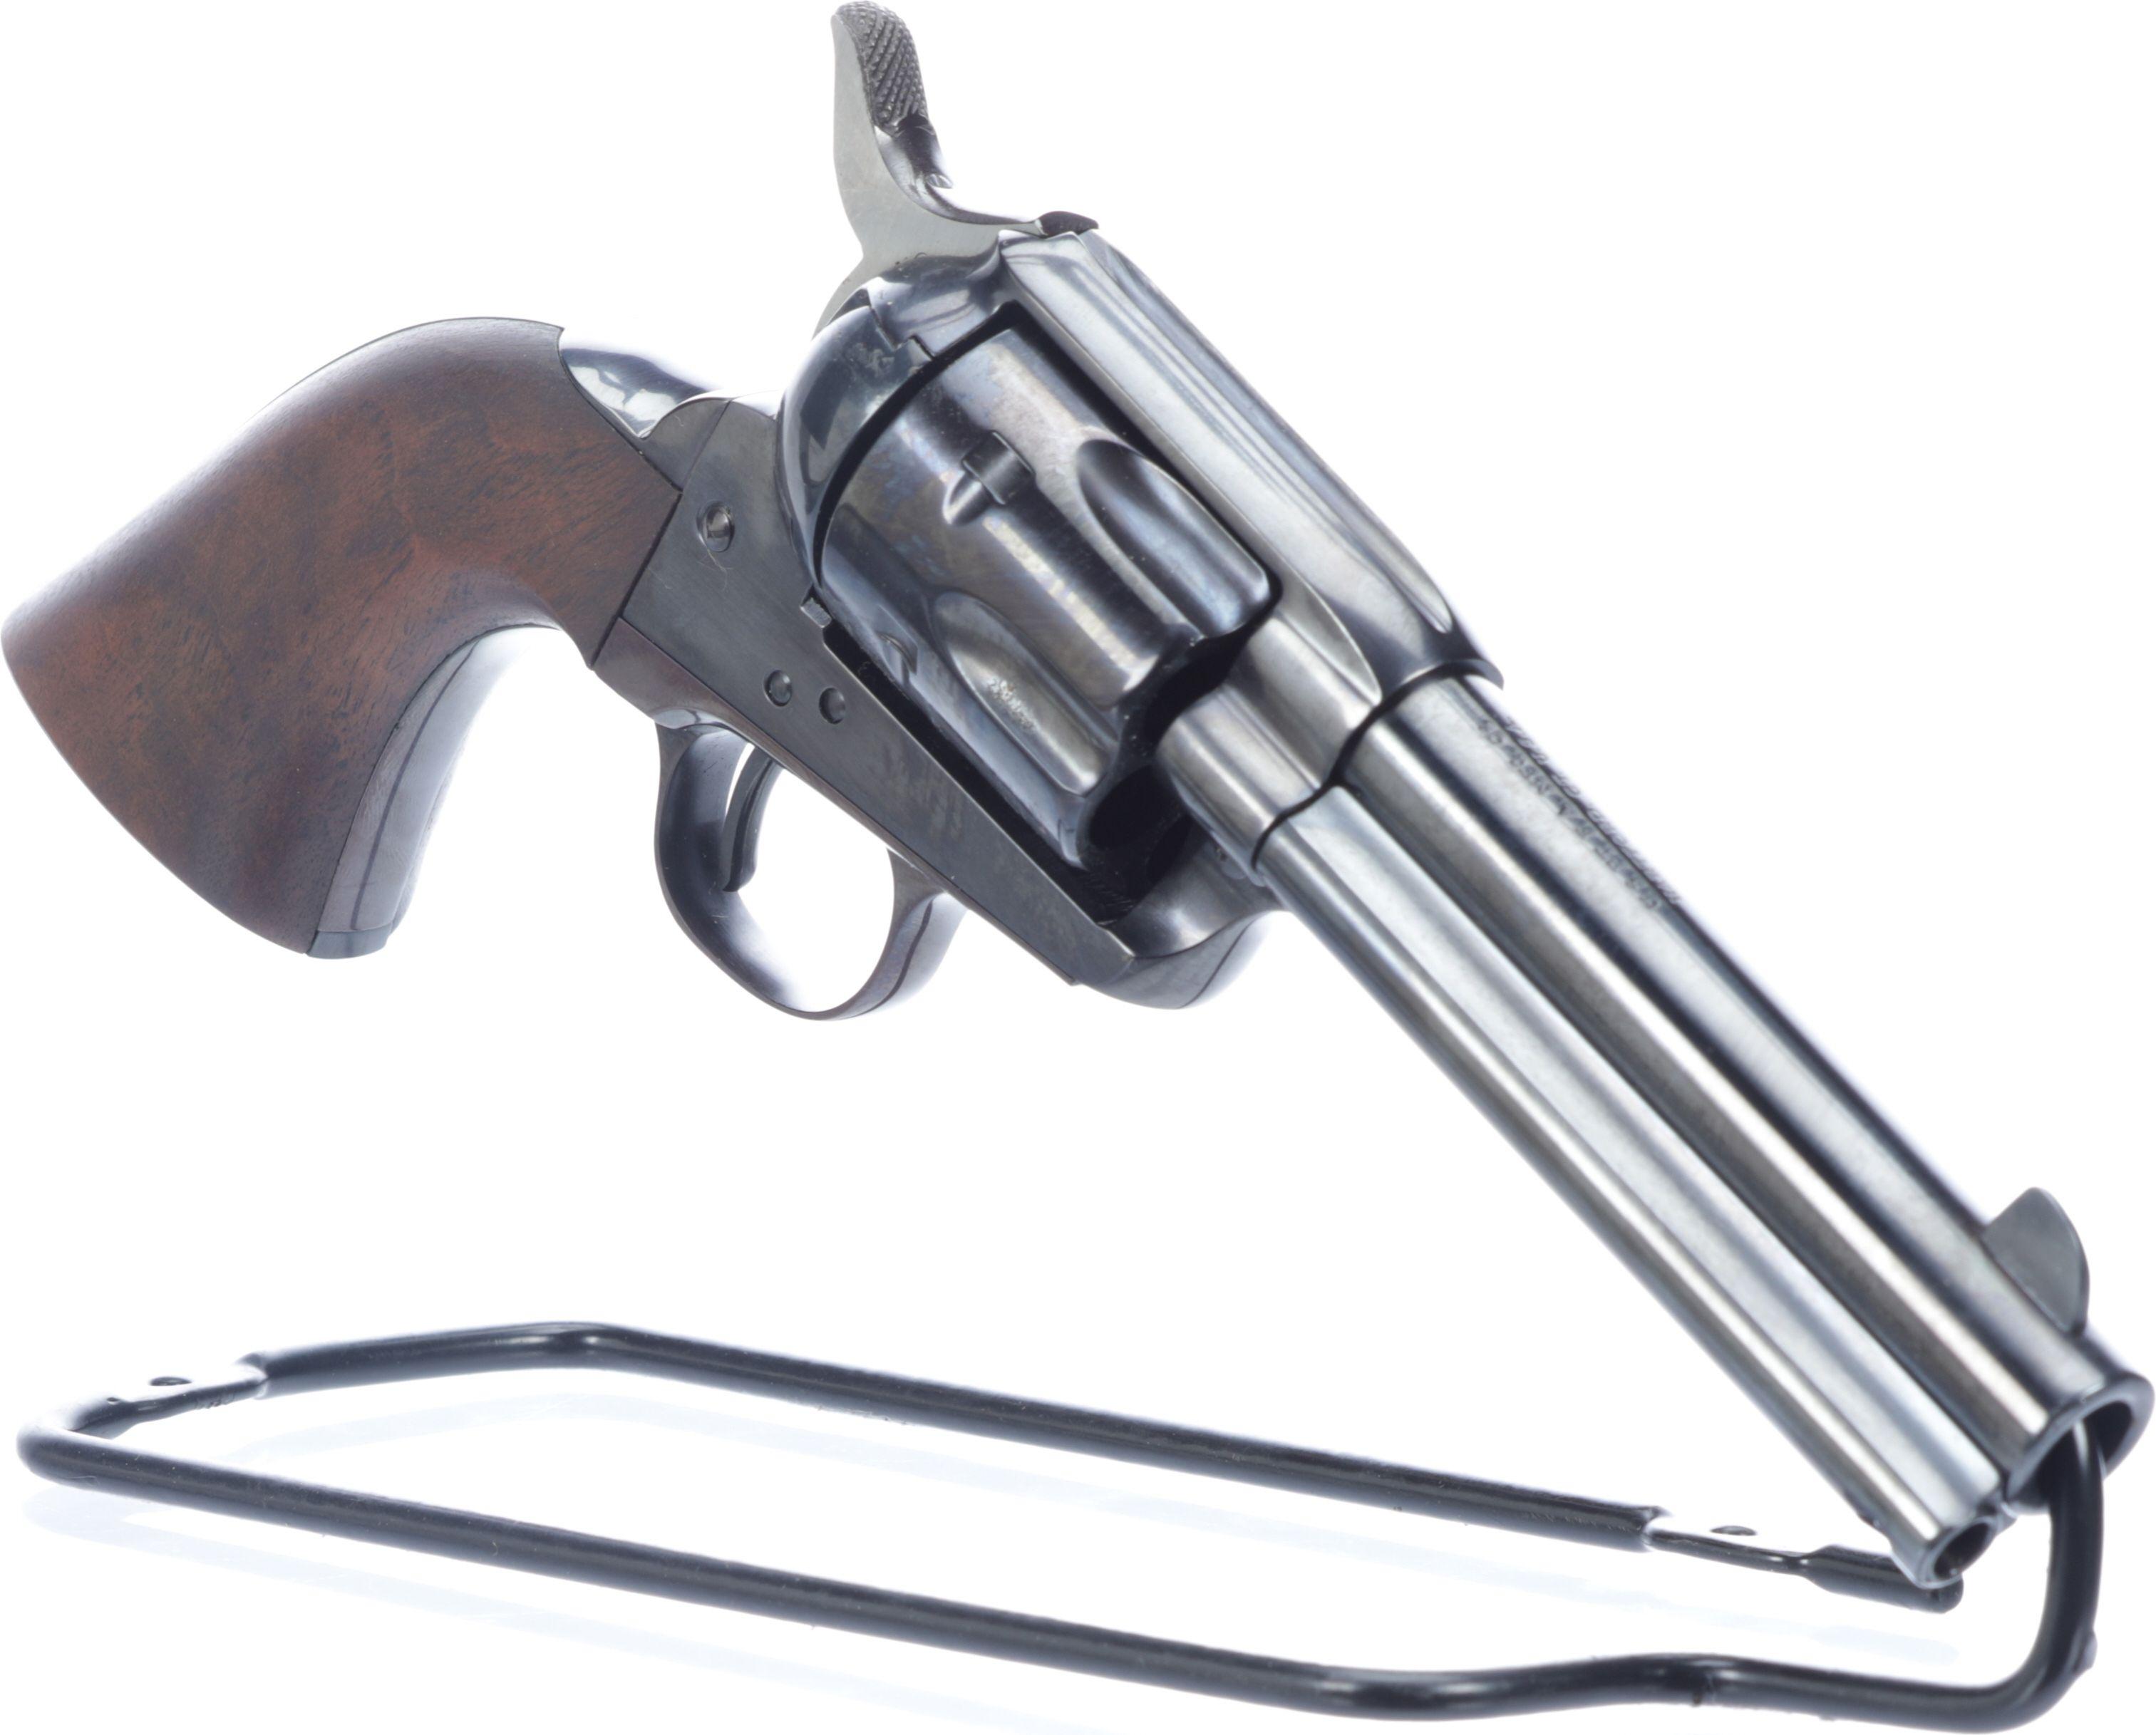 U.S. Patent Fire Arms Manufacturing Single Action Army Revolver